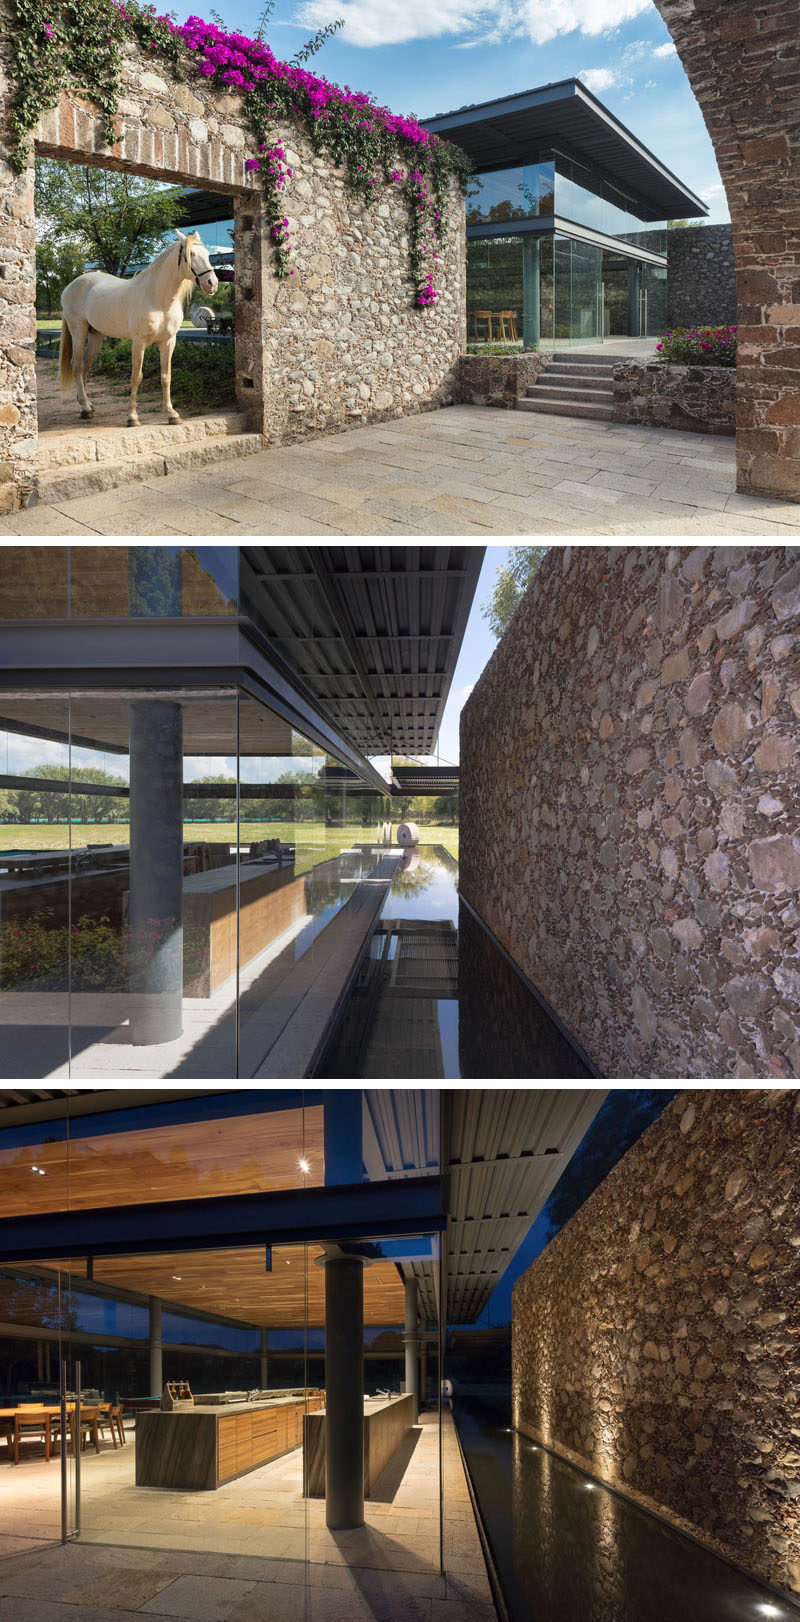 Metal, glass, stone and wood have been used in the design of this modern visitors pavilion. At the entrance to the pavilion, you are greeted by stone walls and large sliding glass doors.